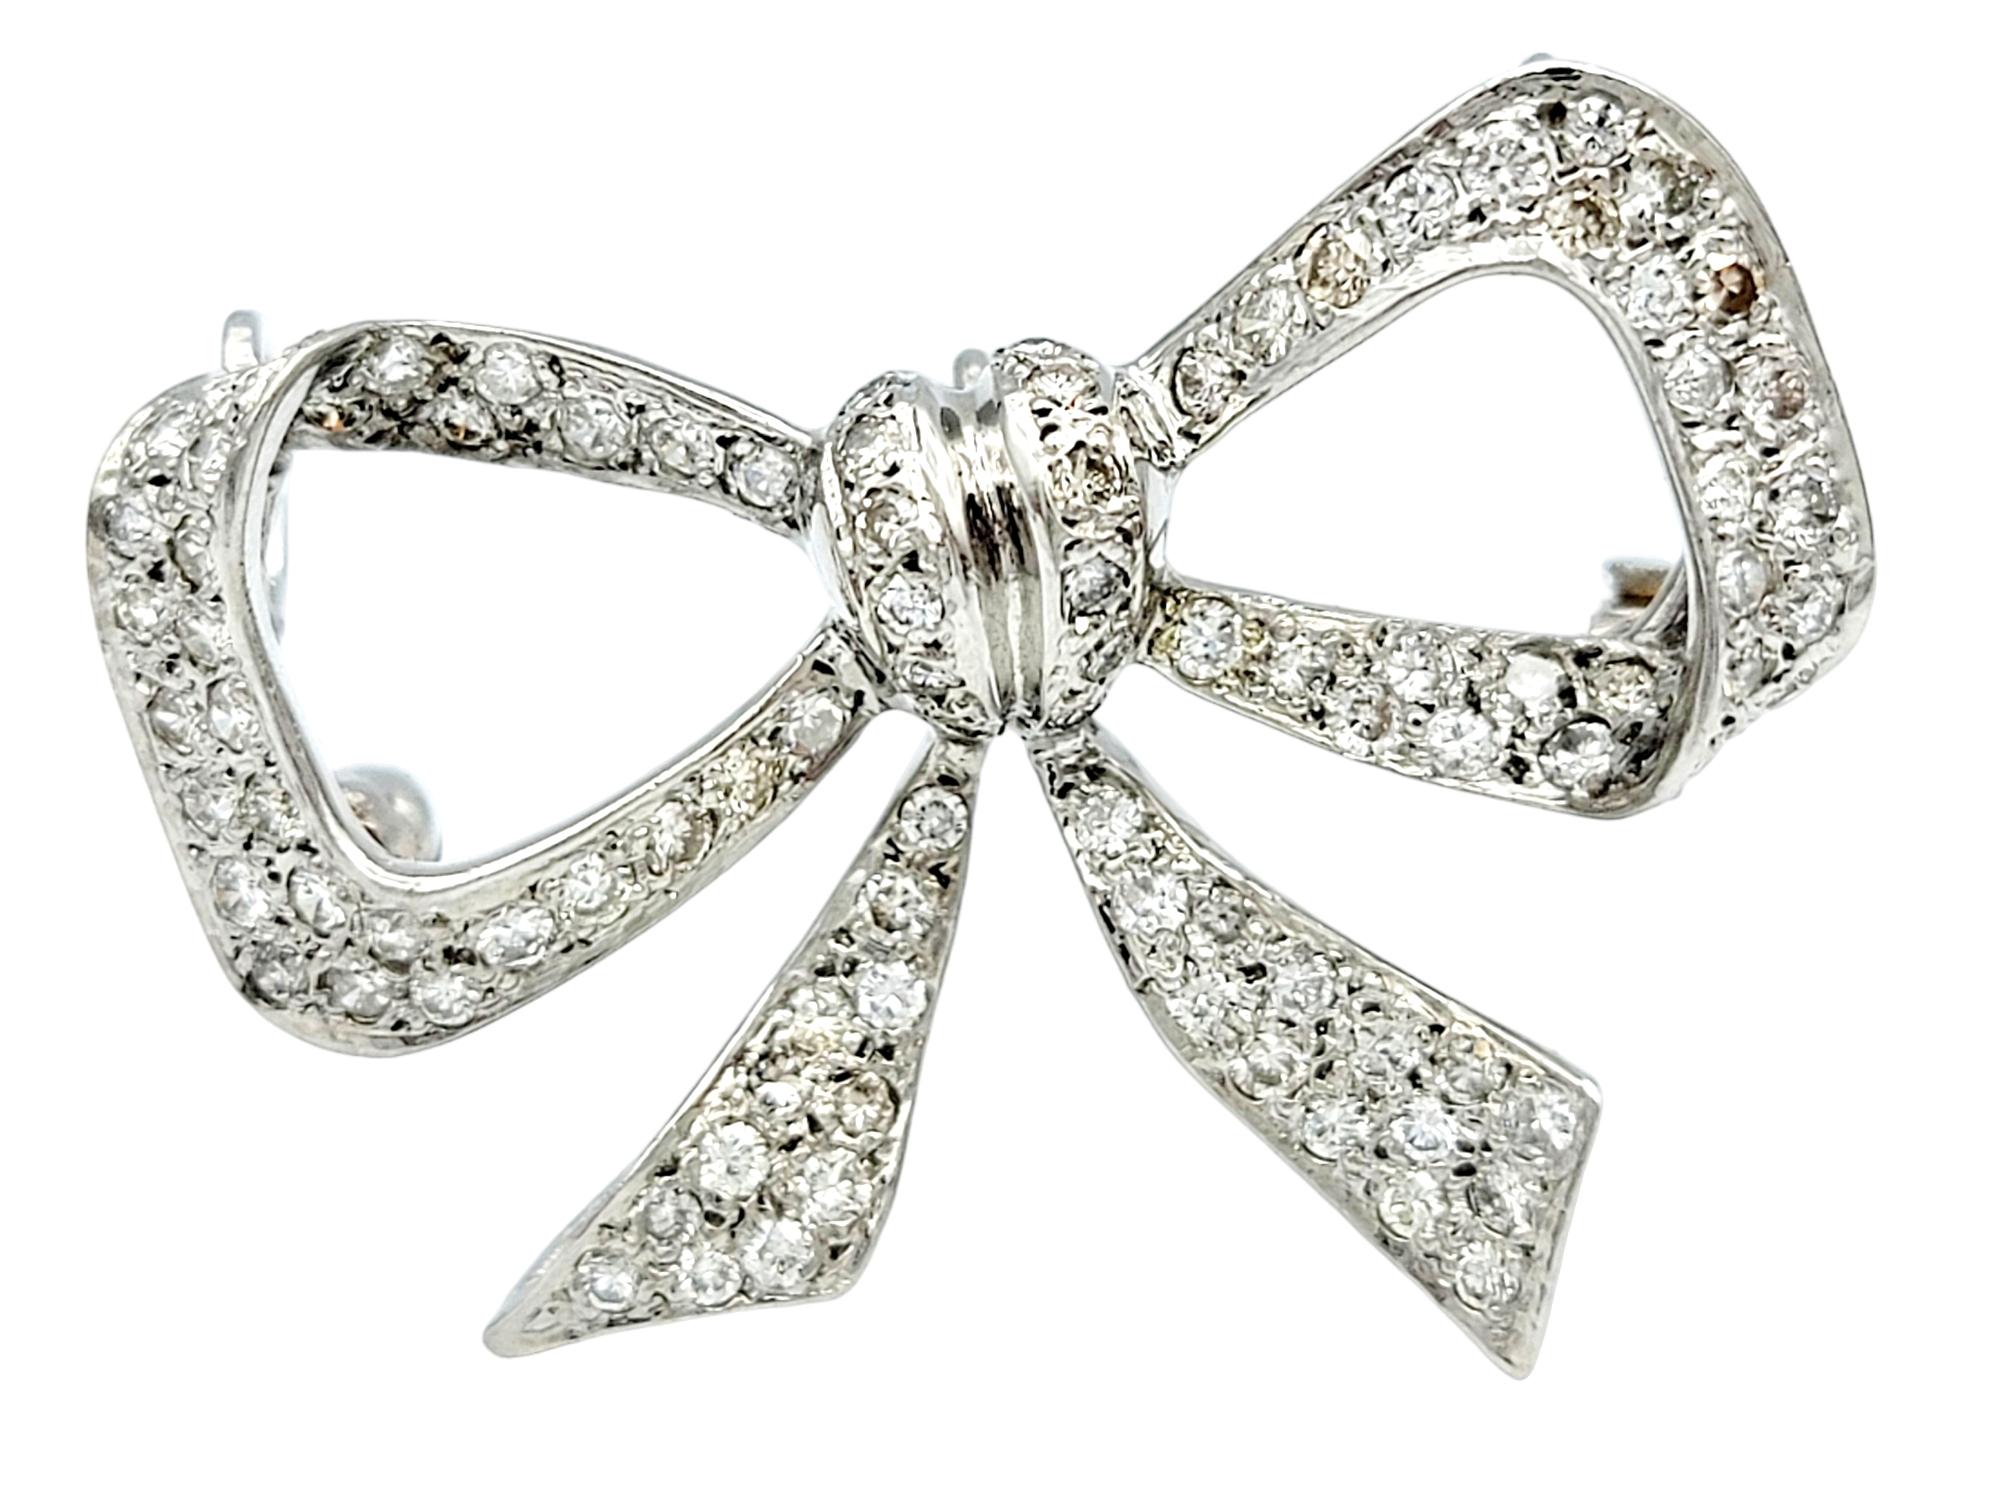 This versatile bow/ribbon design piece, set in 14 karat white gold, exudes a blend of elegance and luxury. Adorned with a stunning array of diamonds, it sparkles and shimmers like a radiant gift waiting to be unwrapped. The unique feature of this